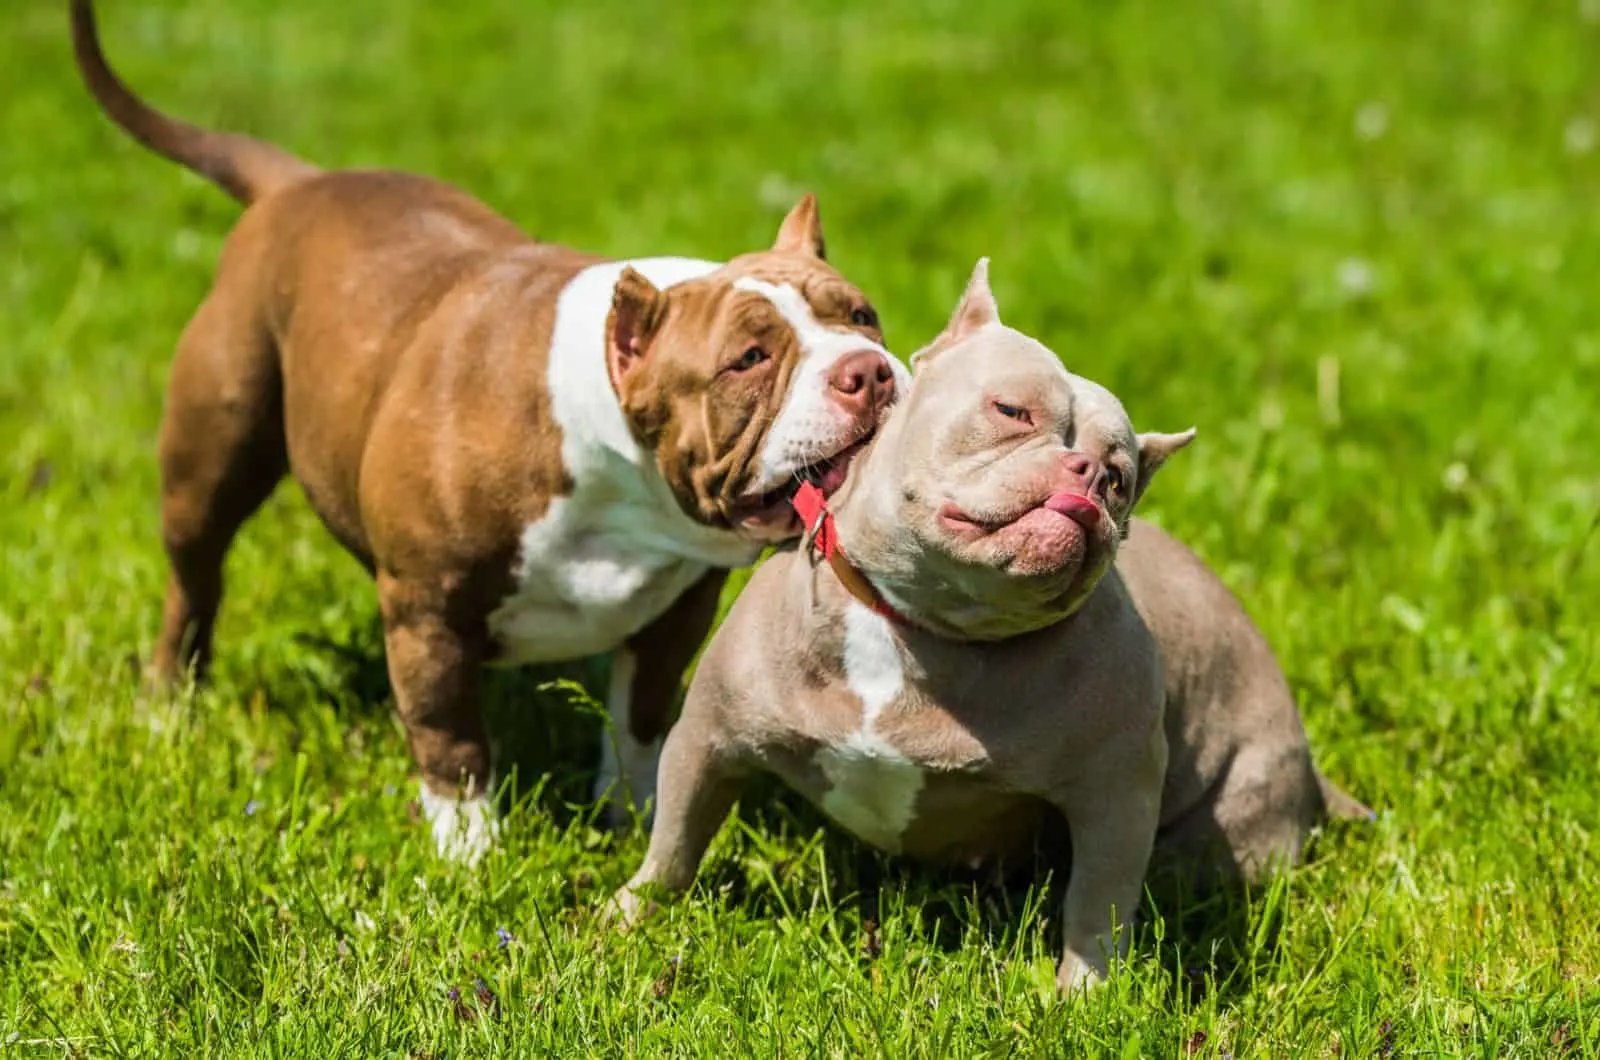 American Bully puppies dogs are playing on the grass